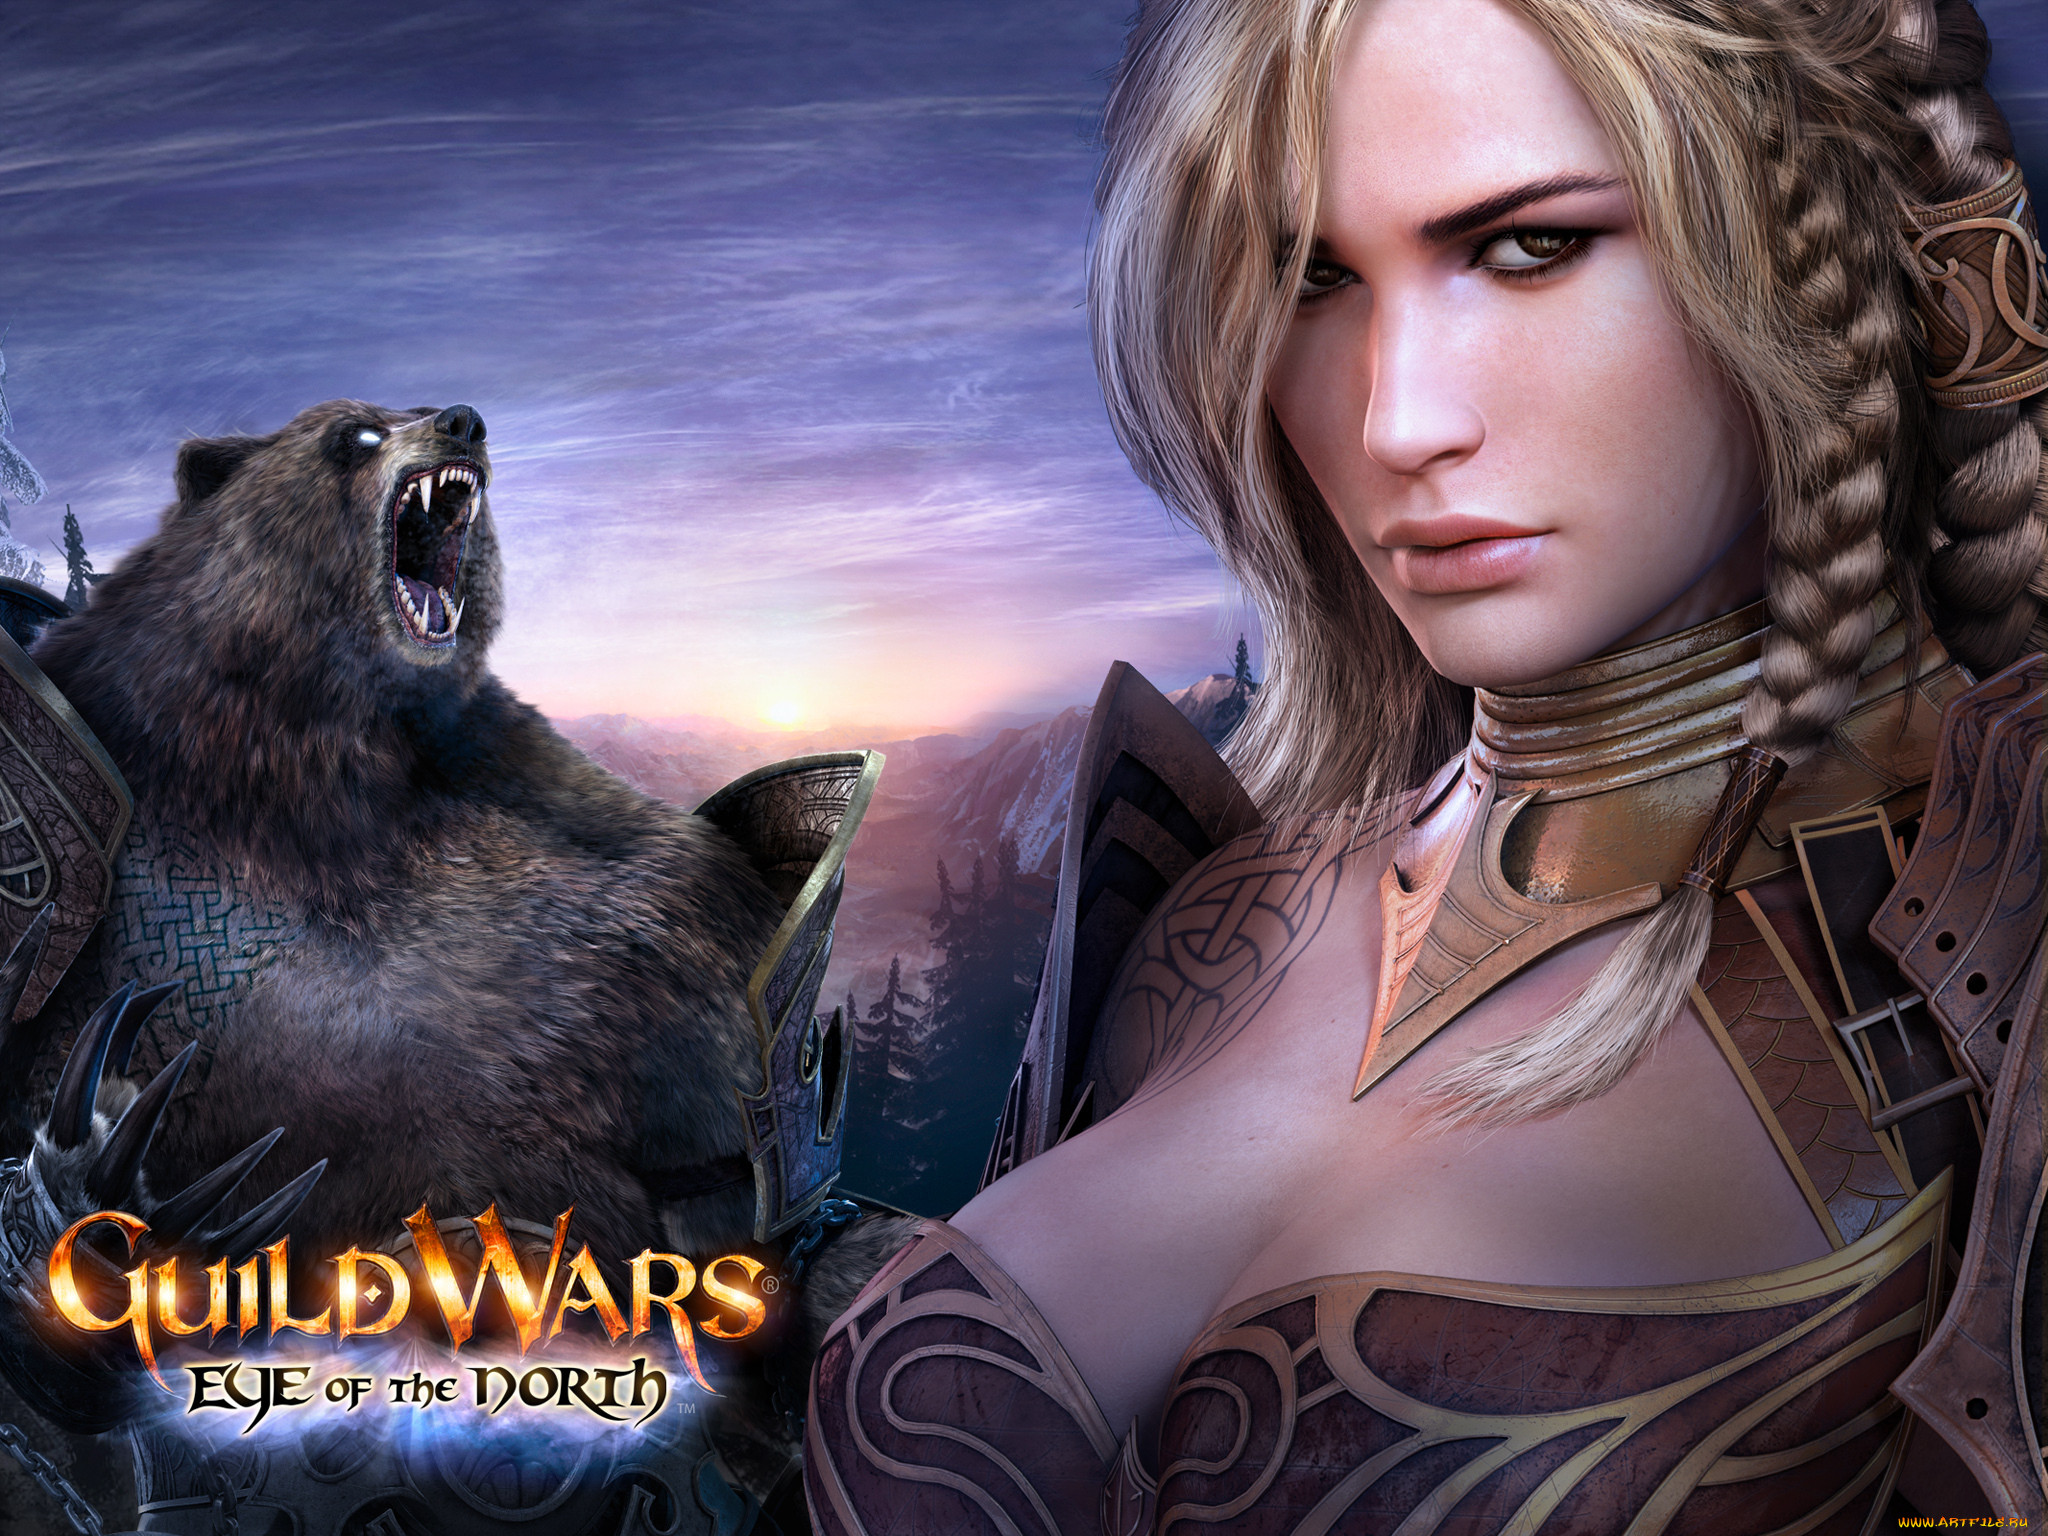  , guild wars,  eye of the north, guild, wars, eye, of, the, north, , , 